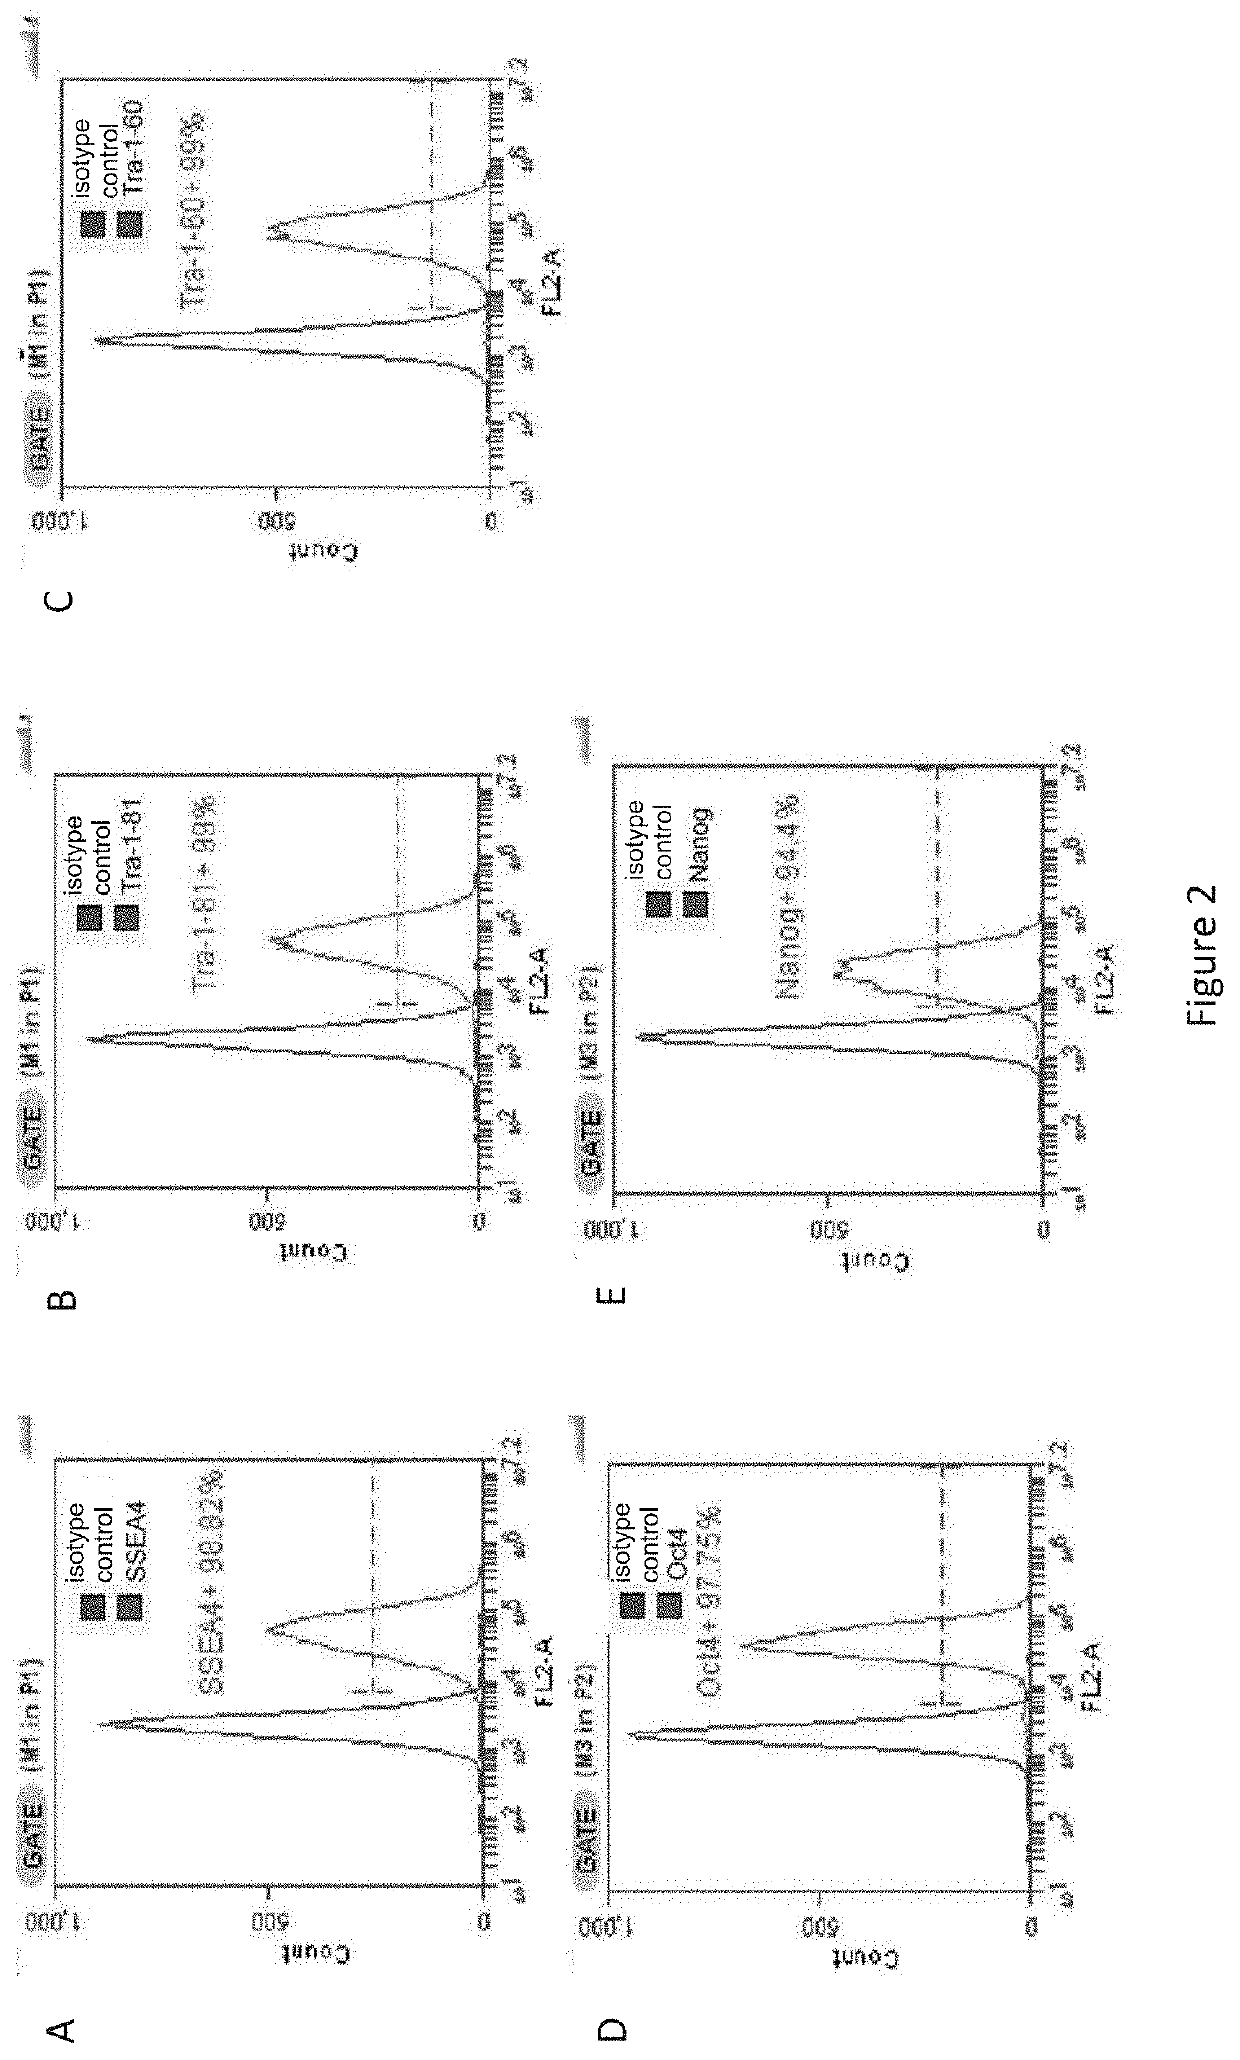 Method for preparing induced pluripotent stem cells by reprogramming somatic cells